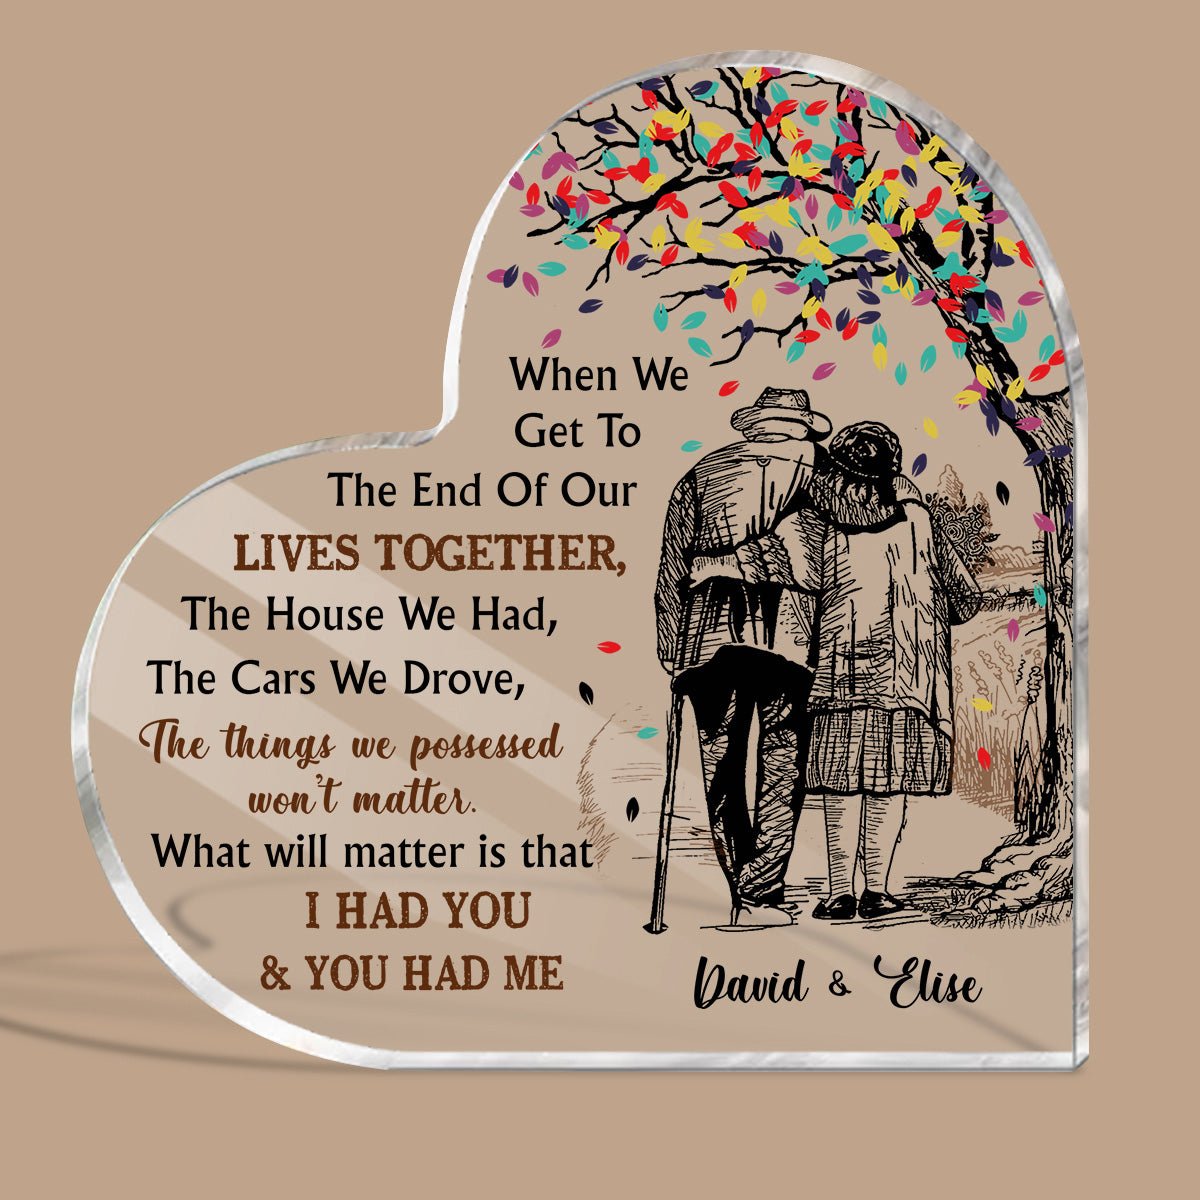 What Will Matter Is That I Had You & You Had Me - Personalized Heart Plaque - Gift for Couple